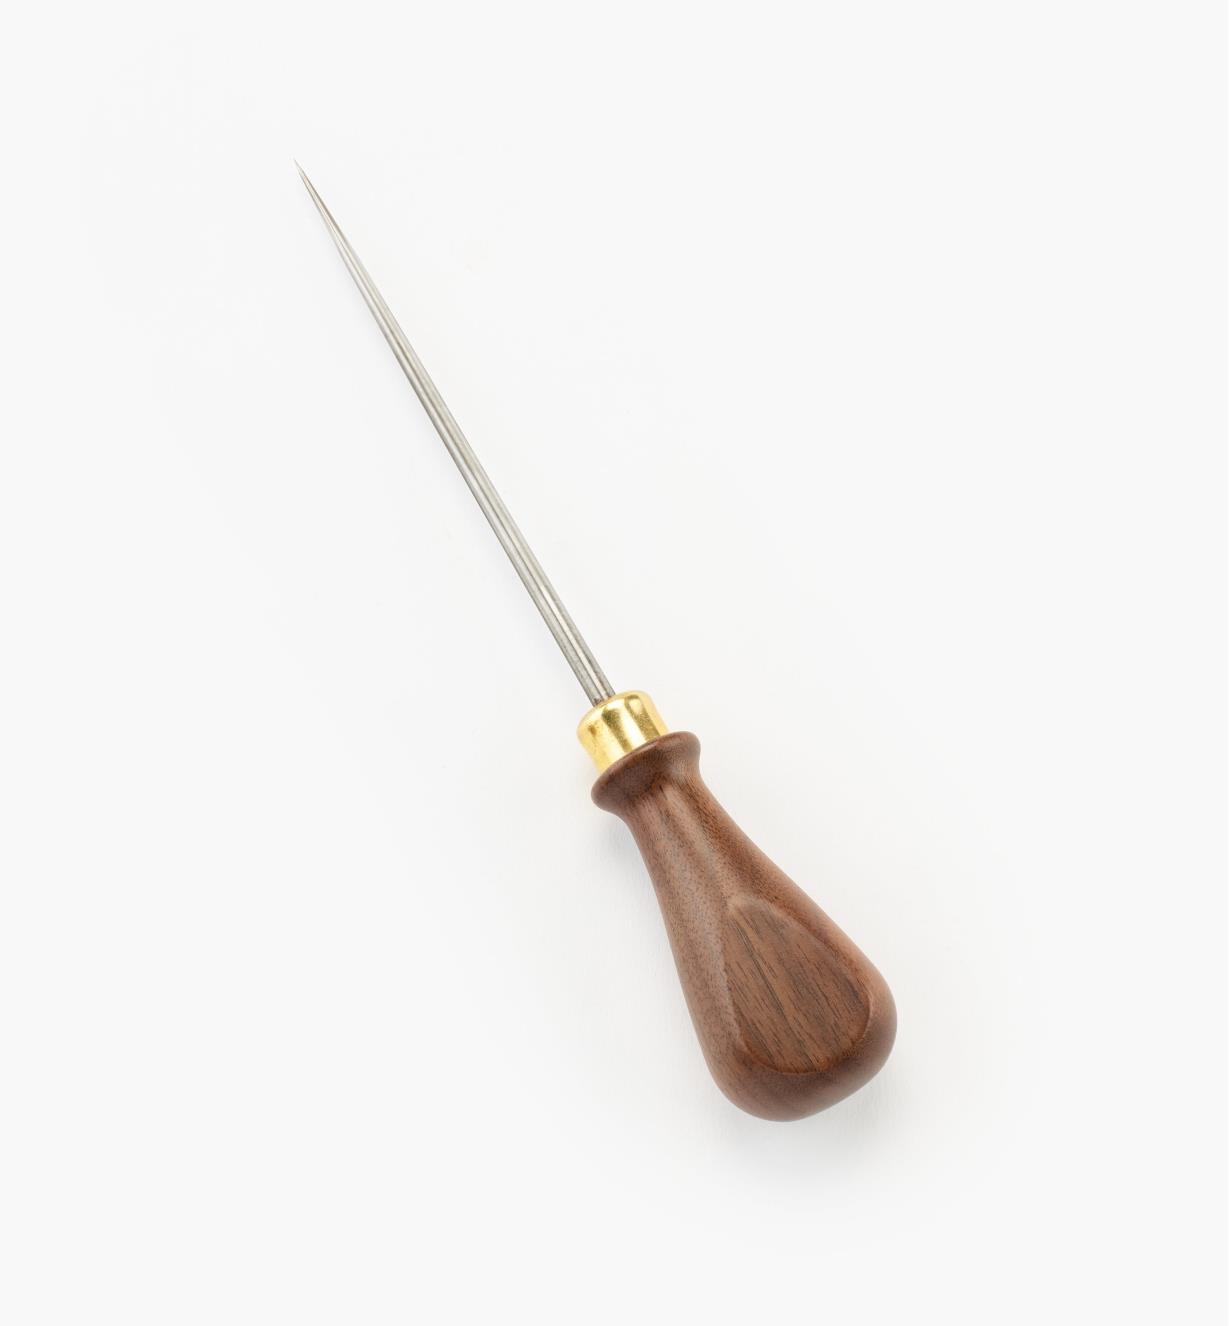 50K0601 - Lee Valley Scratch Awl